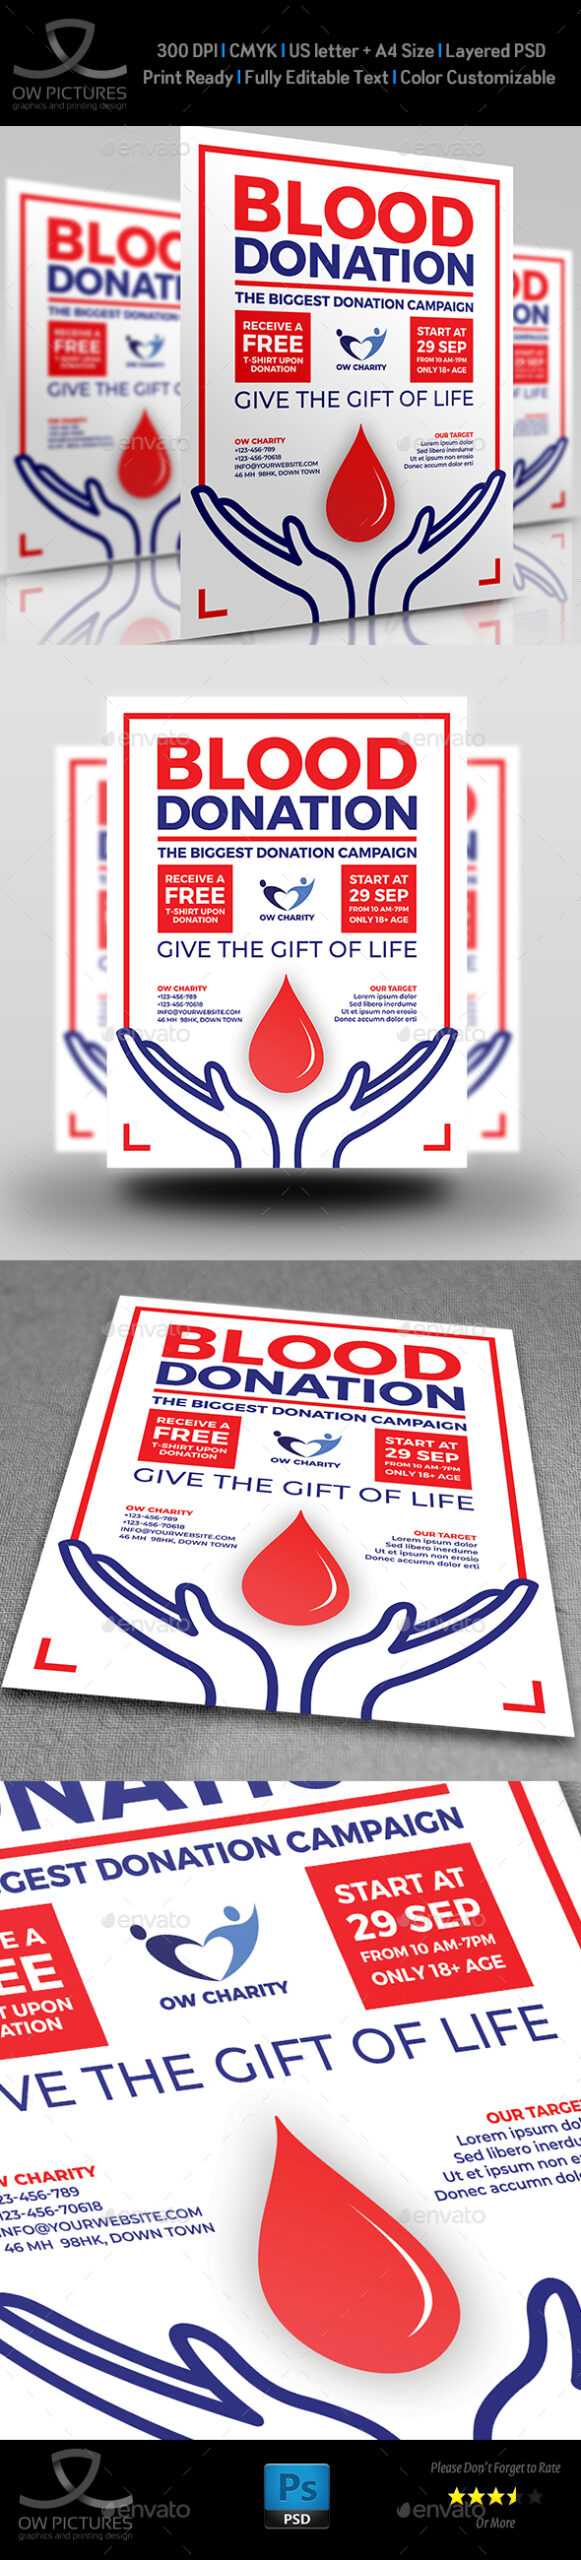 Donation Flyer Graphics, Designs & Templates From Graphicriver With Donation Flyer Template